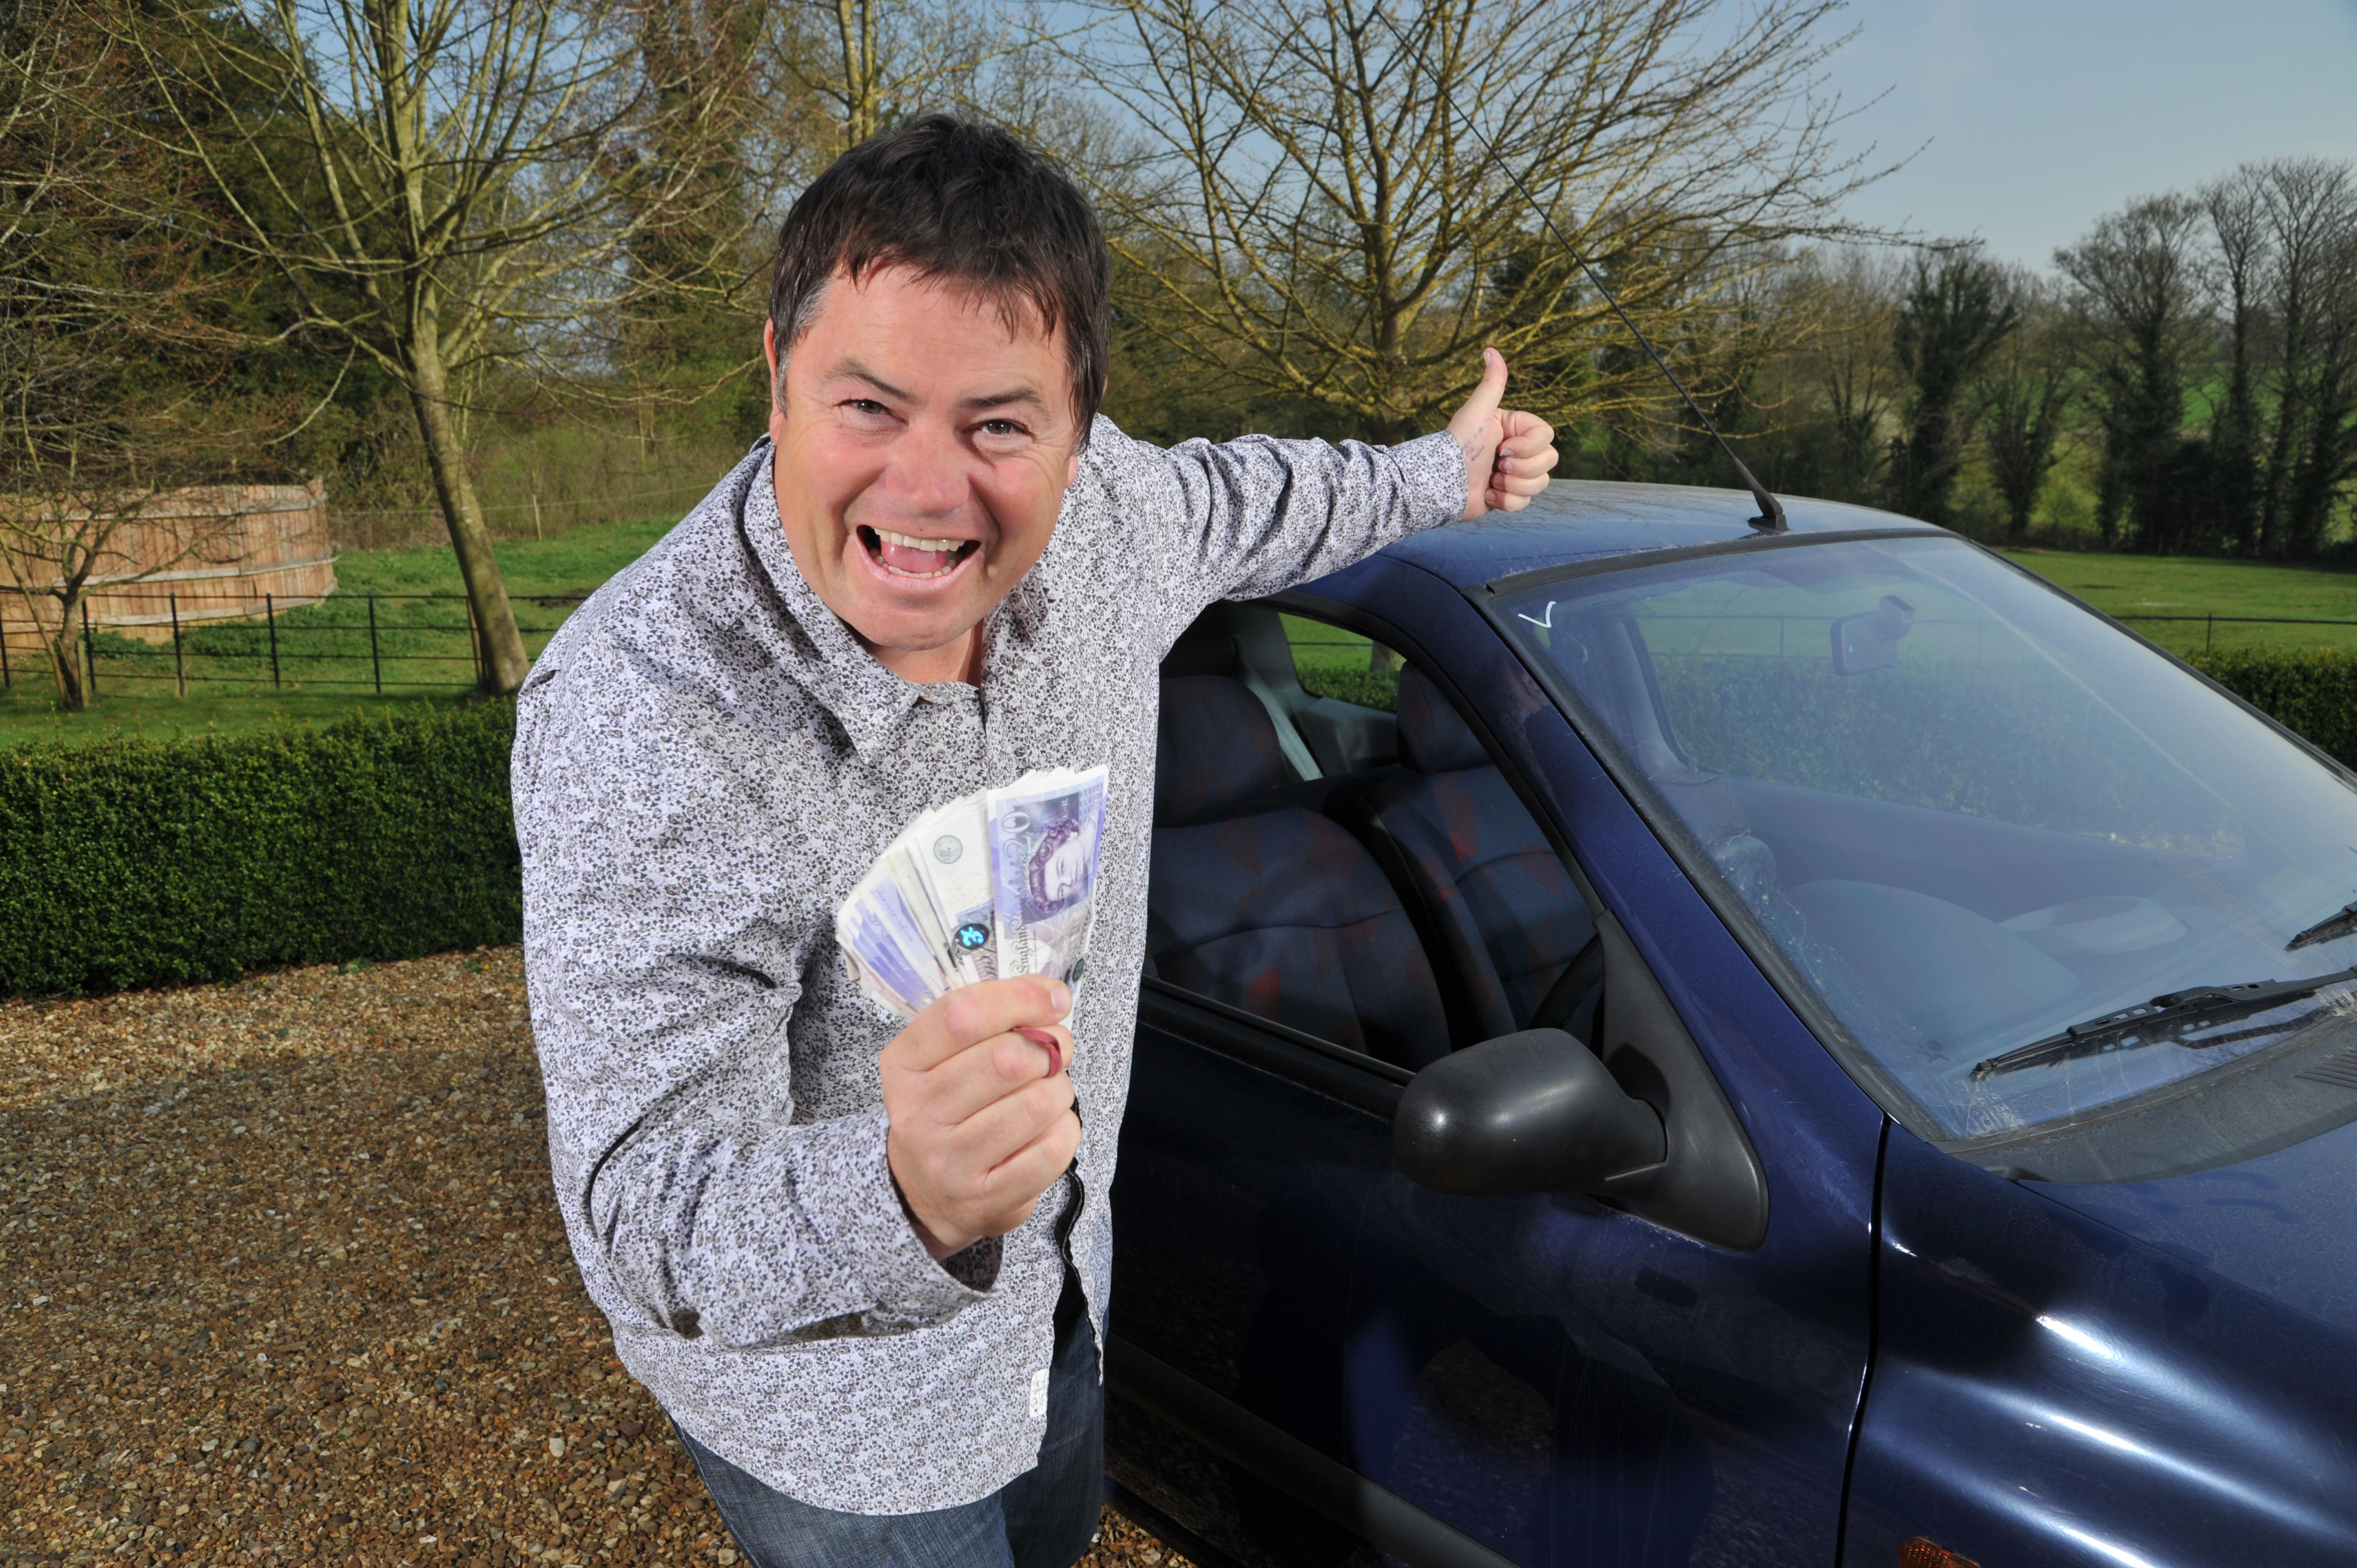 Mike Brewer has warned thousands of drivers that a car tax 'loophole' could vanish in just months